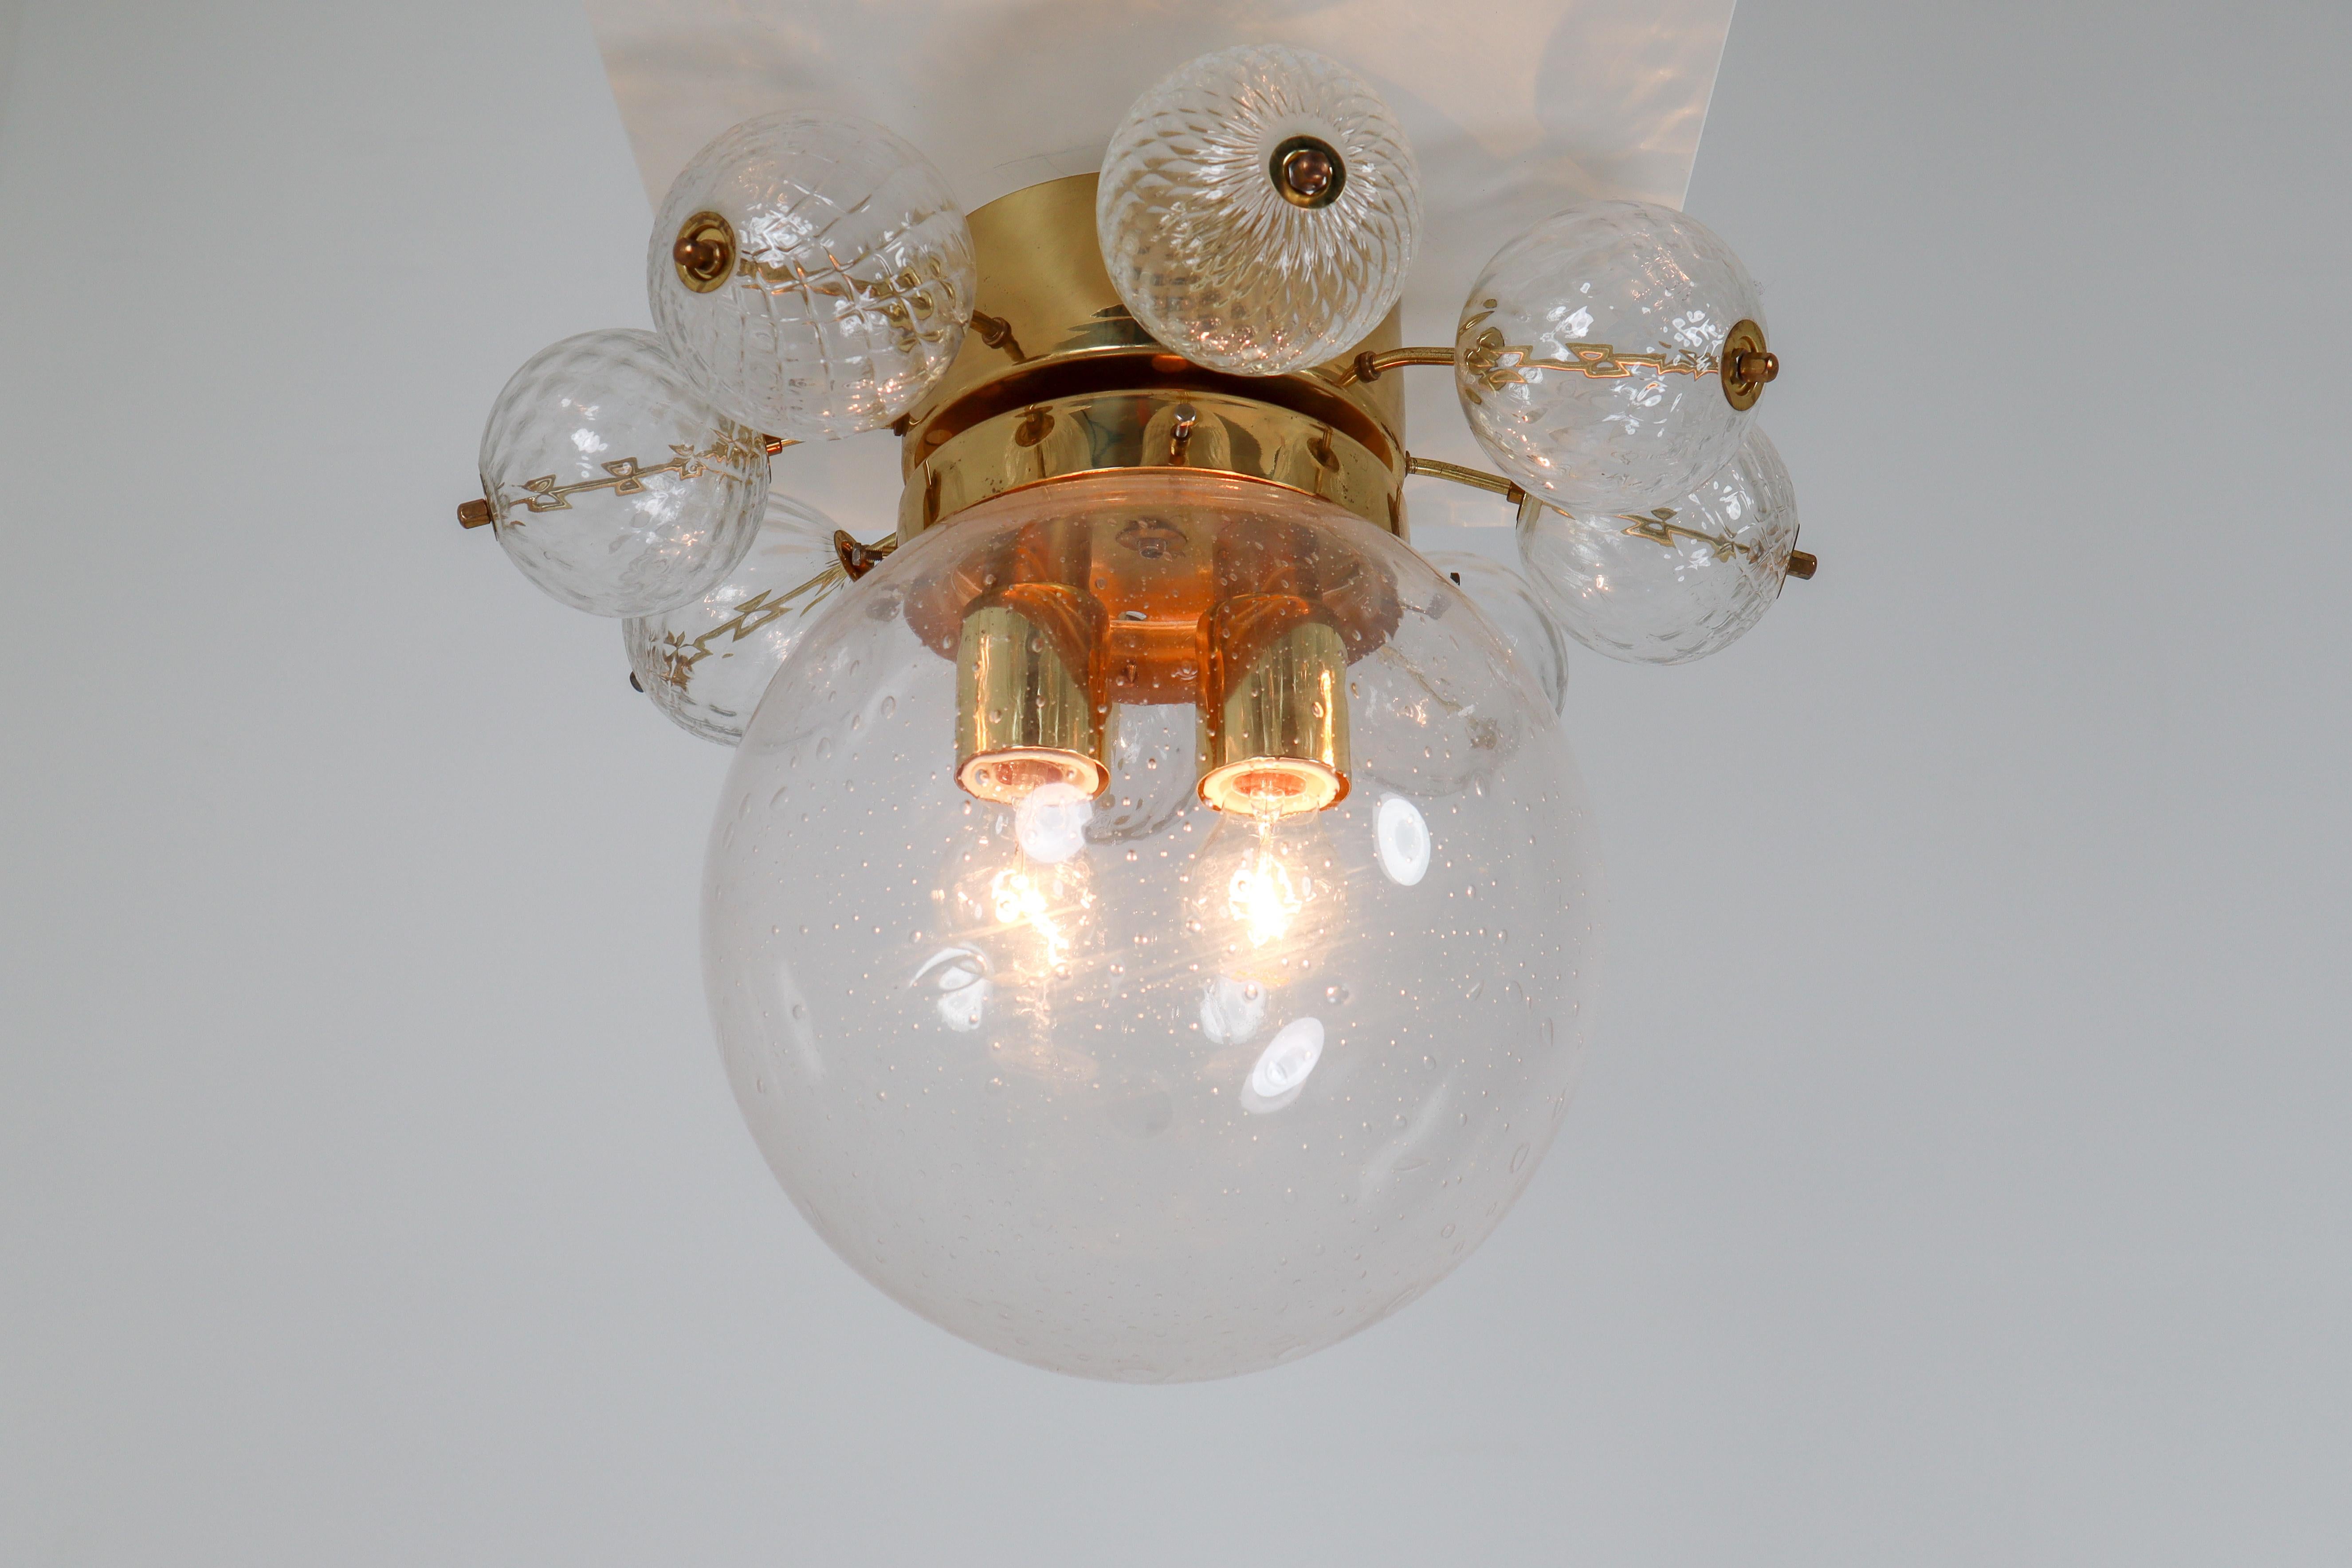 Set of Two Midcentury Brass Ceiling Lamp-Chandeliers with Handblown Glass 1